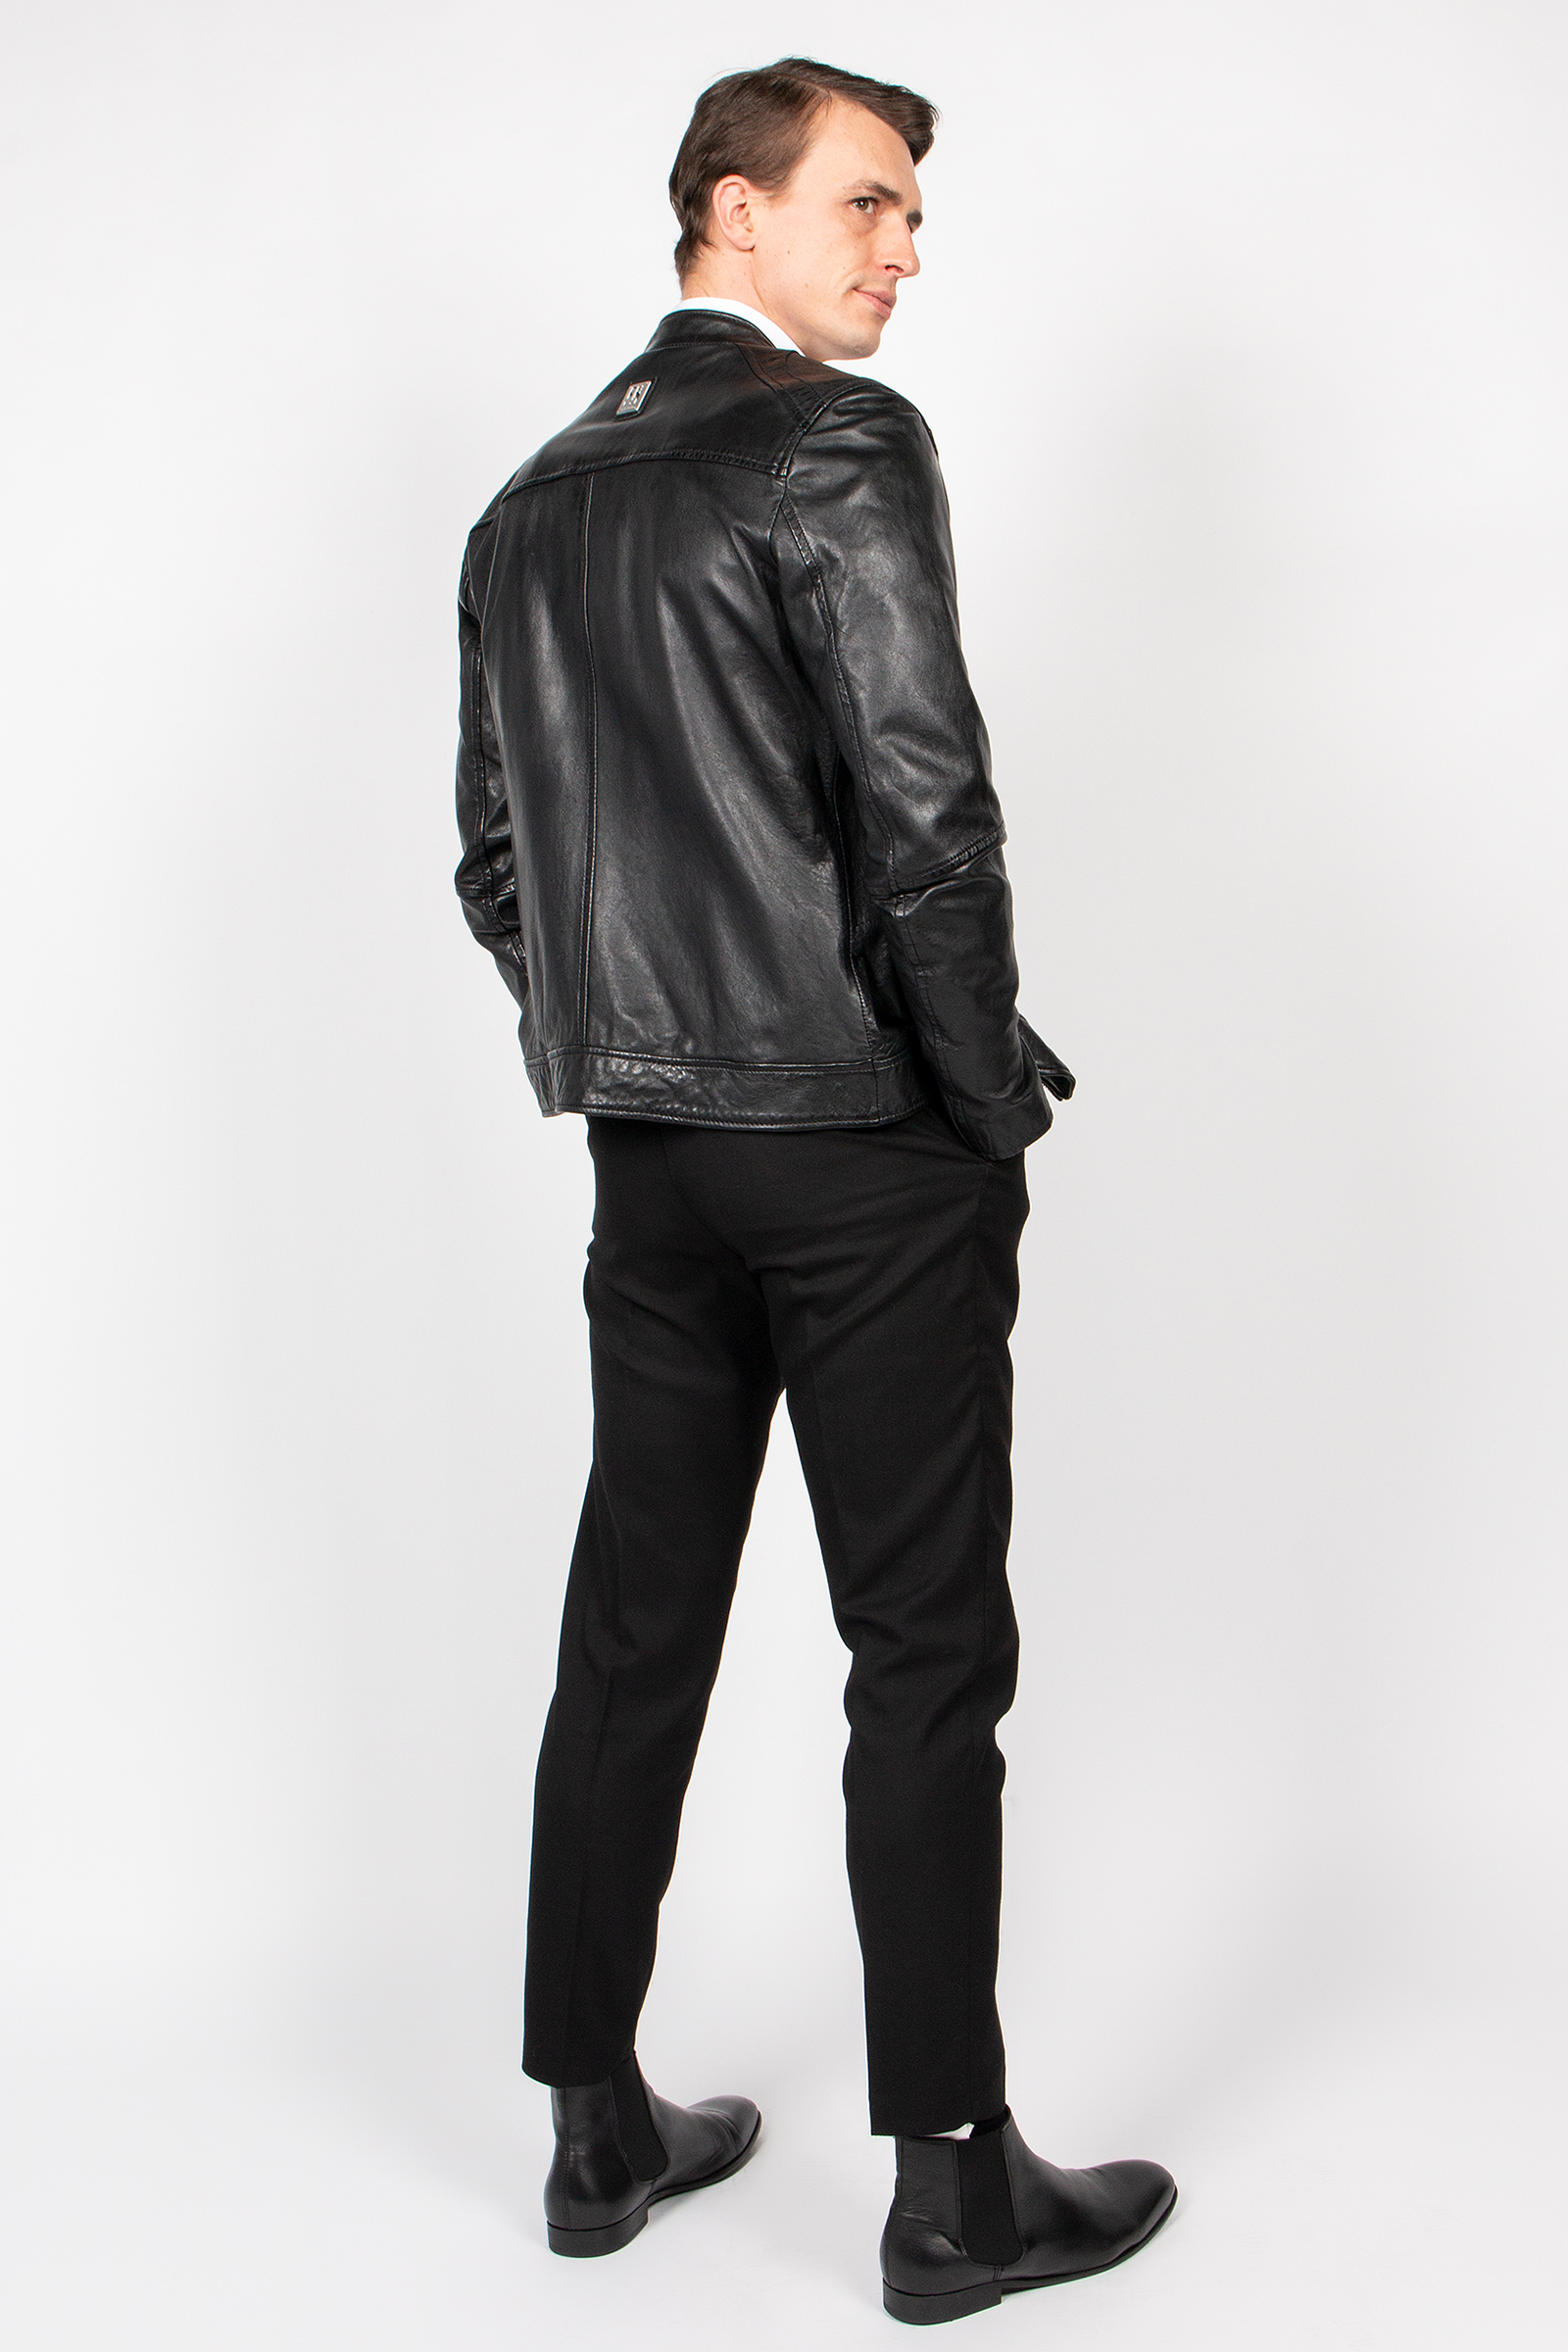 Lucky Jim-FN | Leather Jackets | Men | Freaky Nation